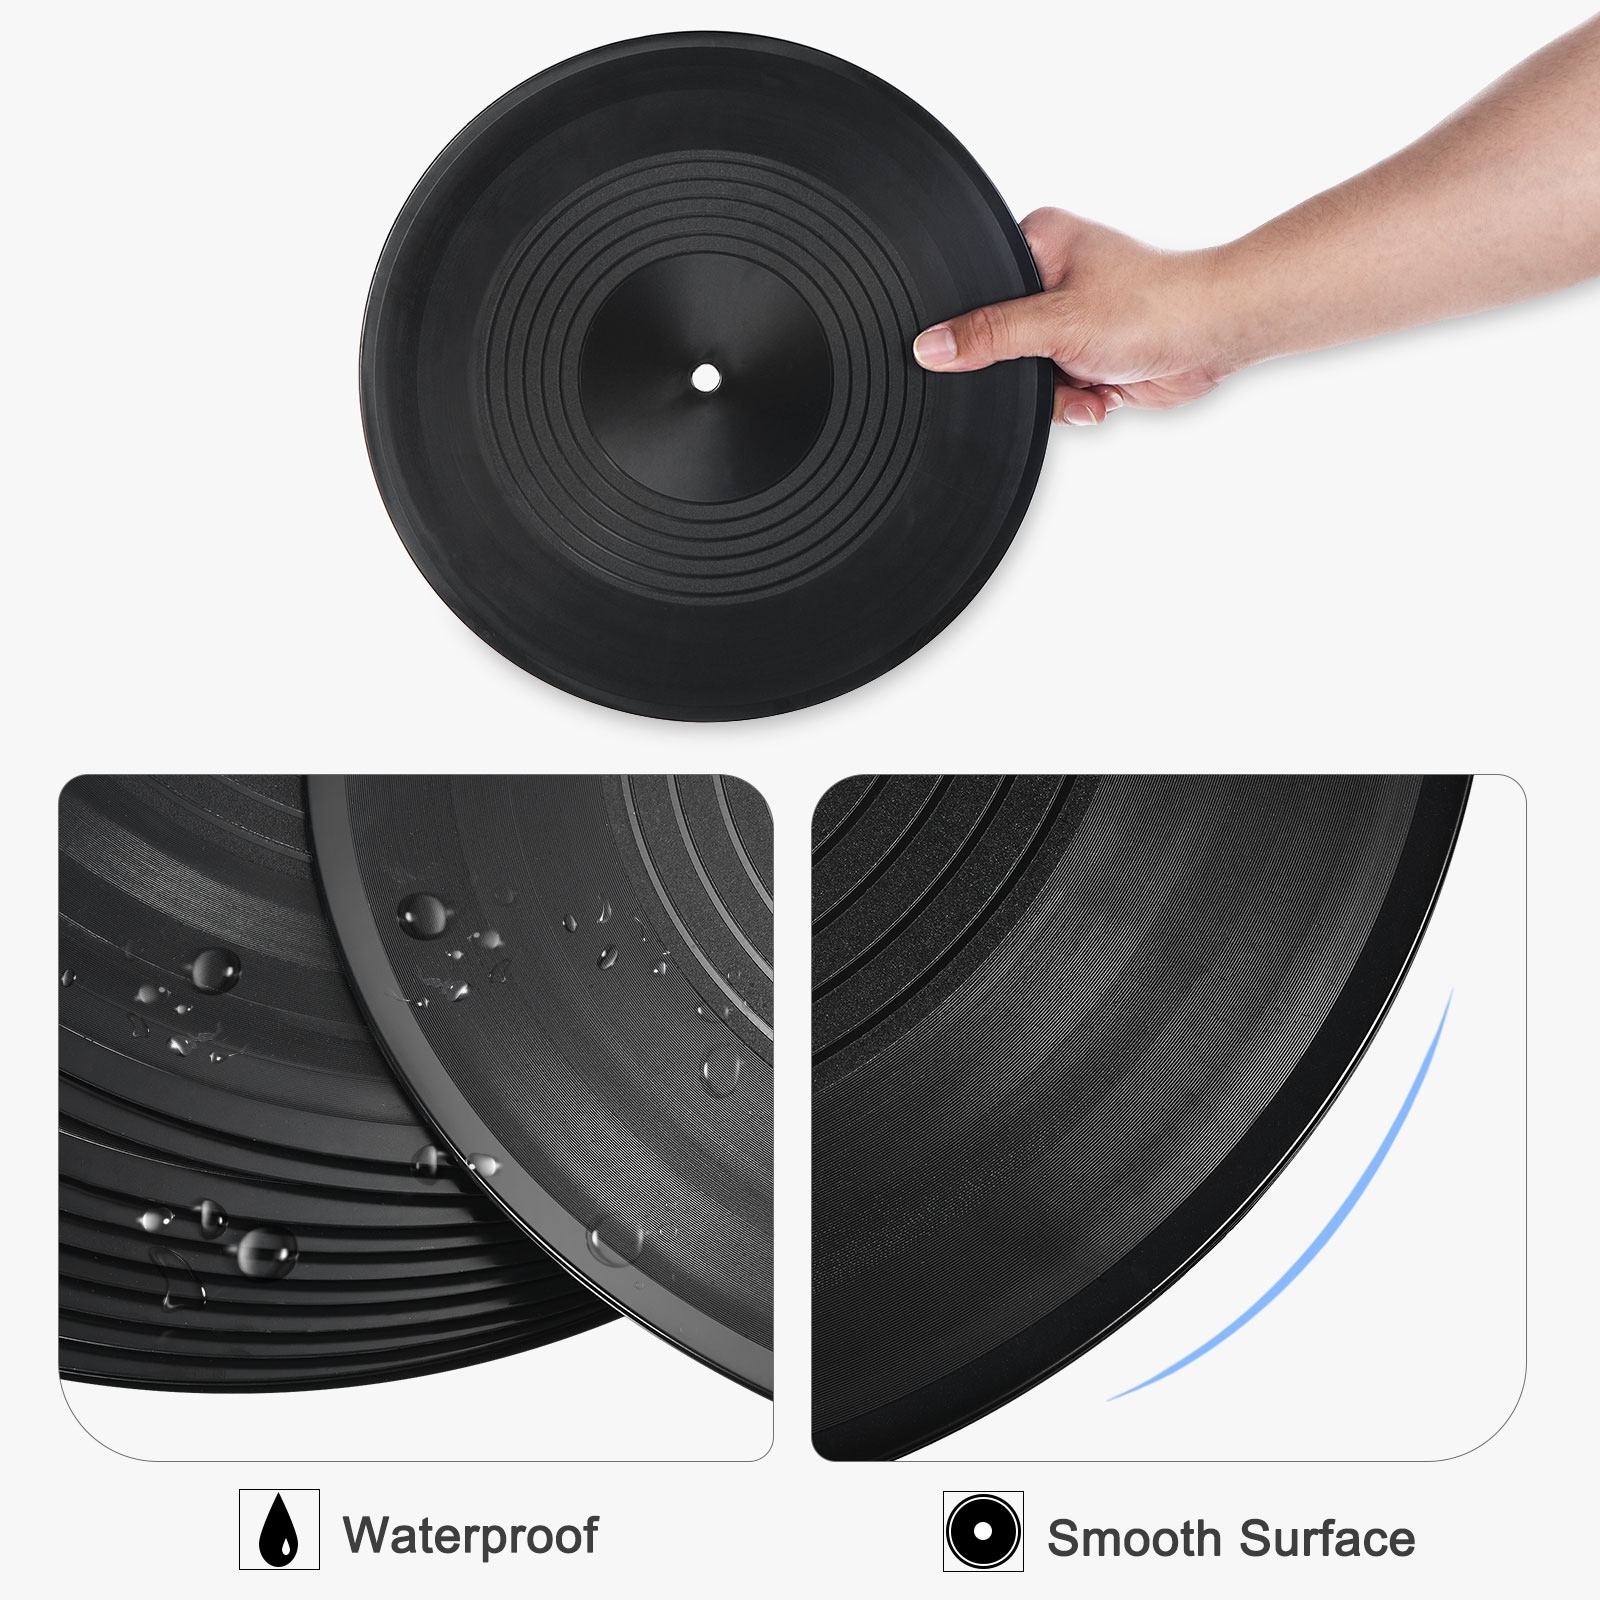 Vinyl Records on the Wall Decor Stock Video - Video of black